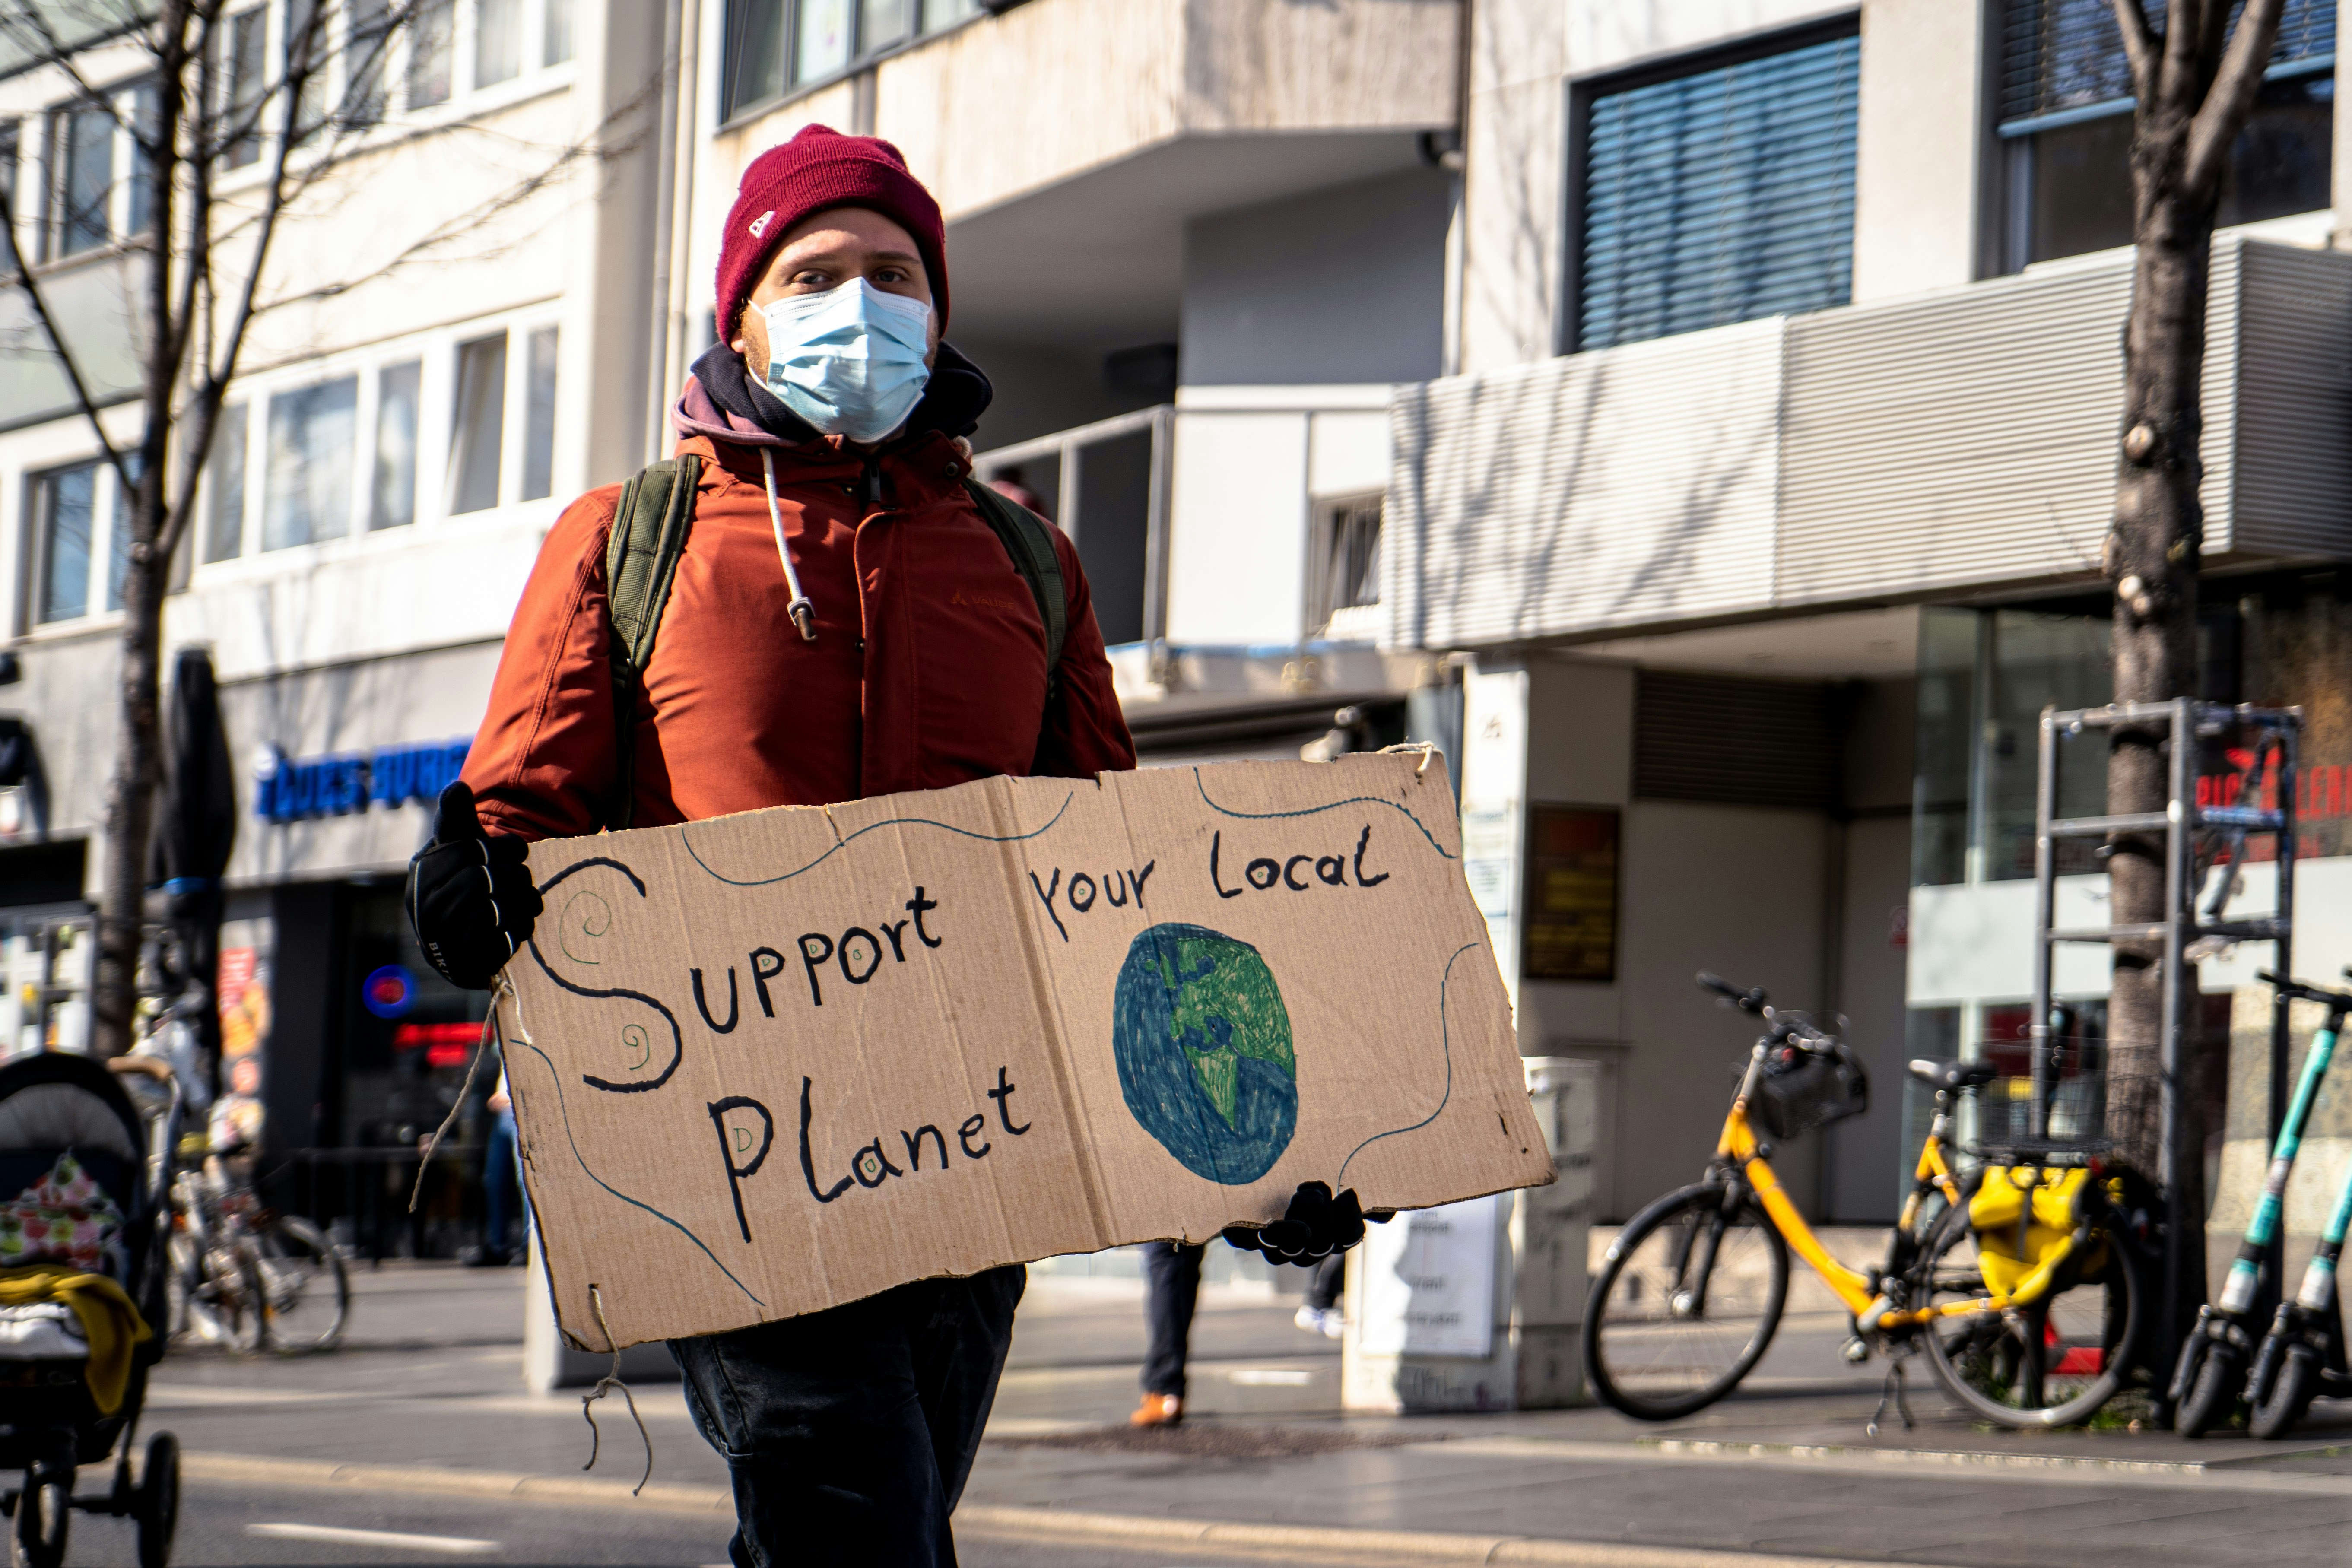 Support your local Planet! 
- Fridays for Future Bonn, 2021-03-19